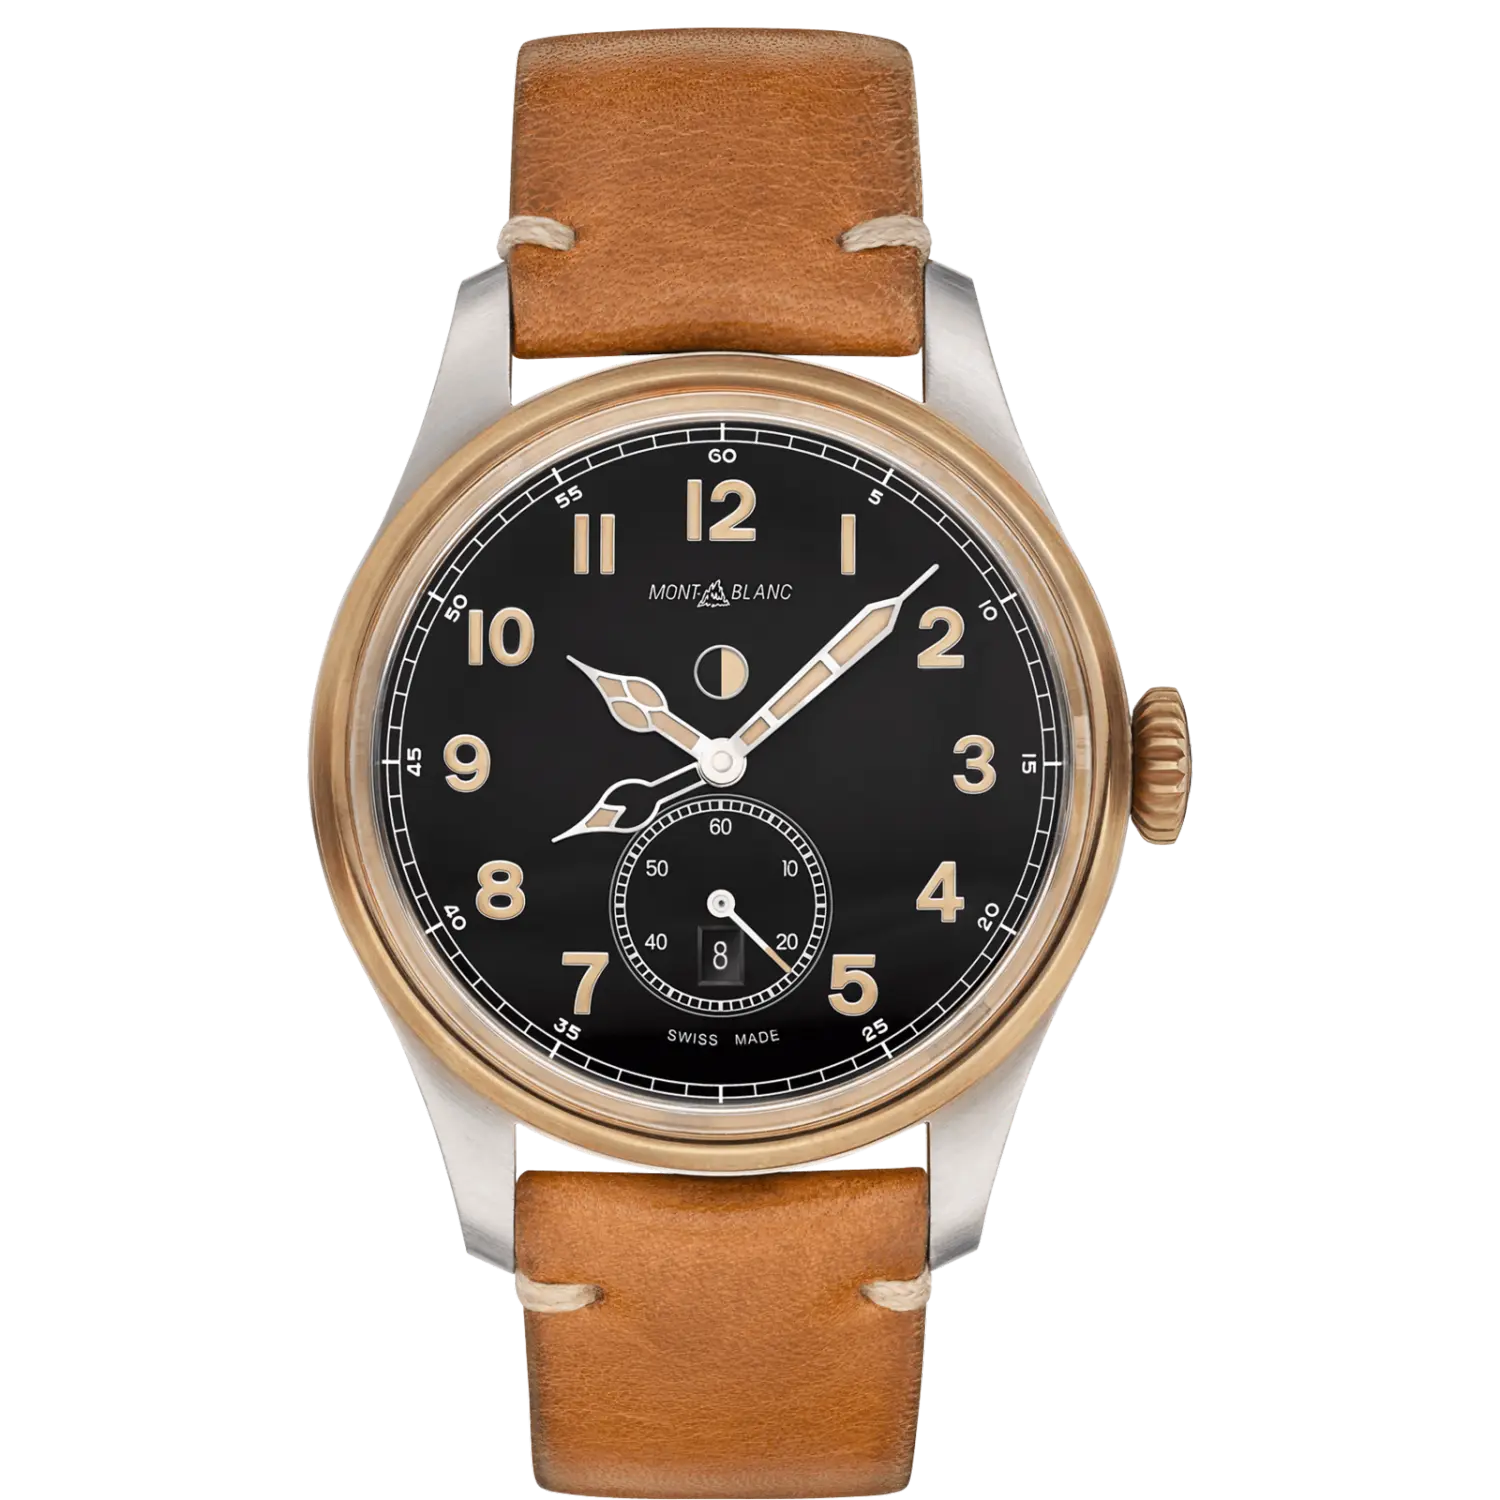 Montblance 1858 Automatic mens watch with a dual time display